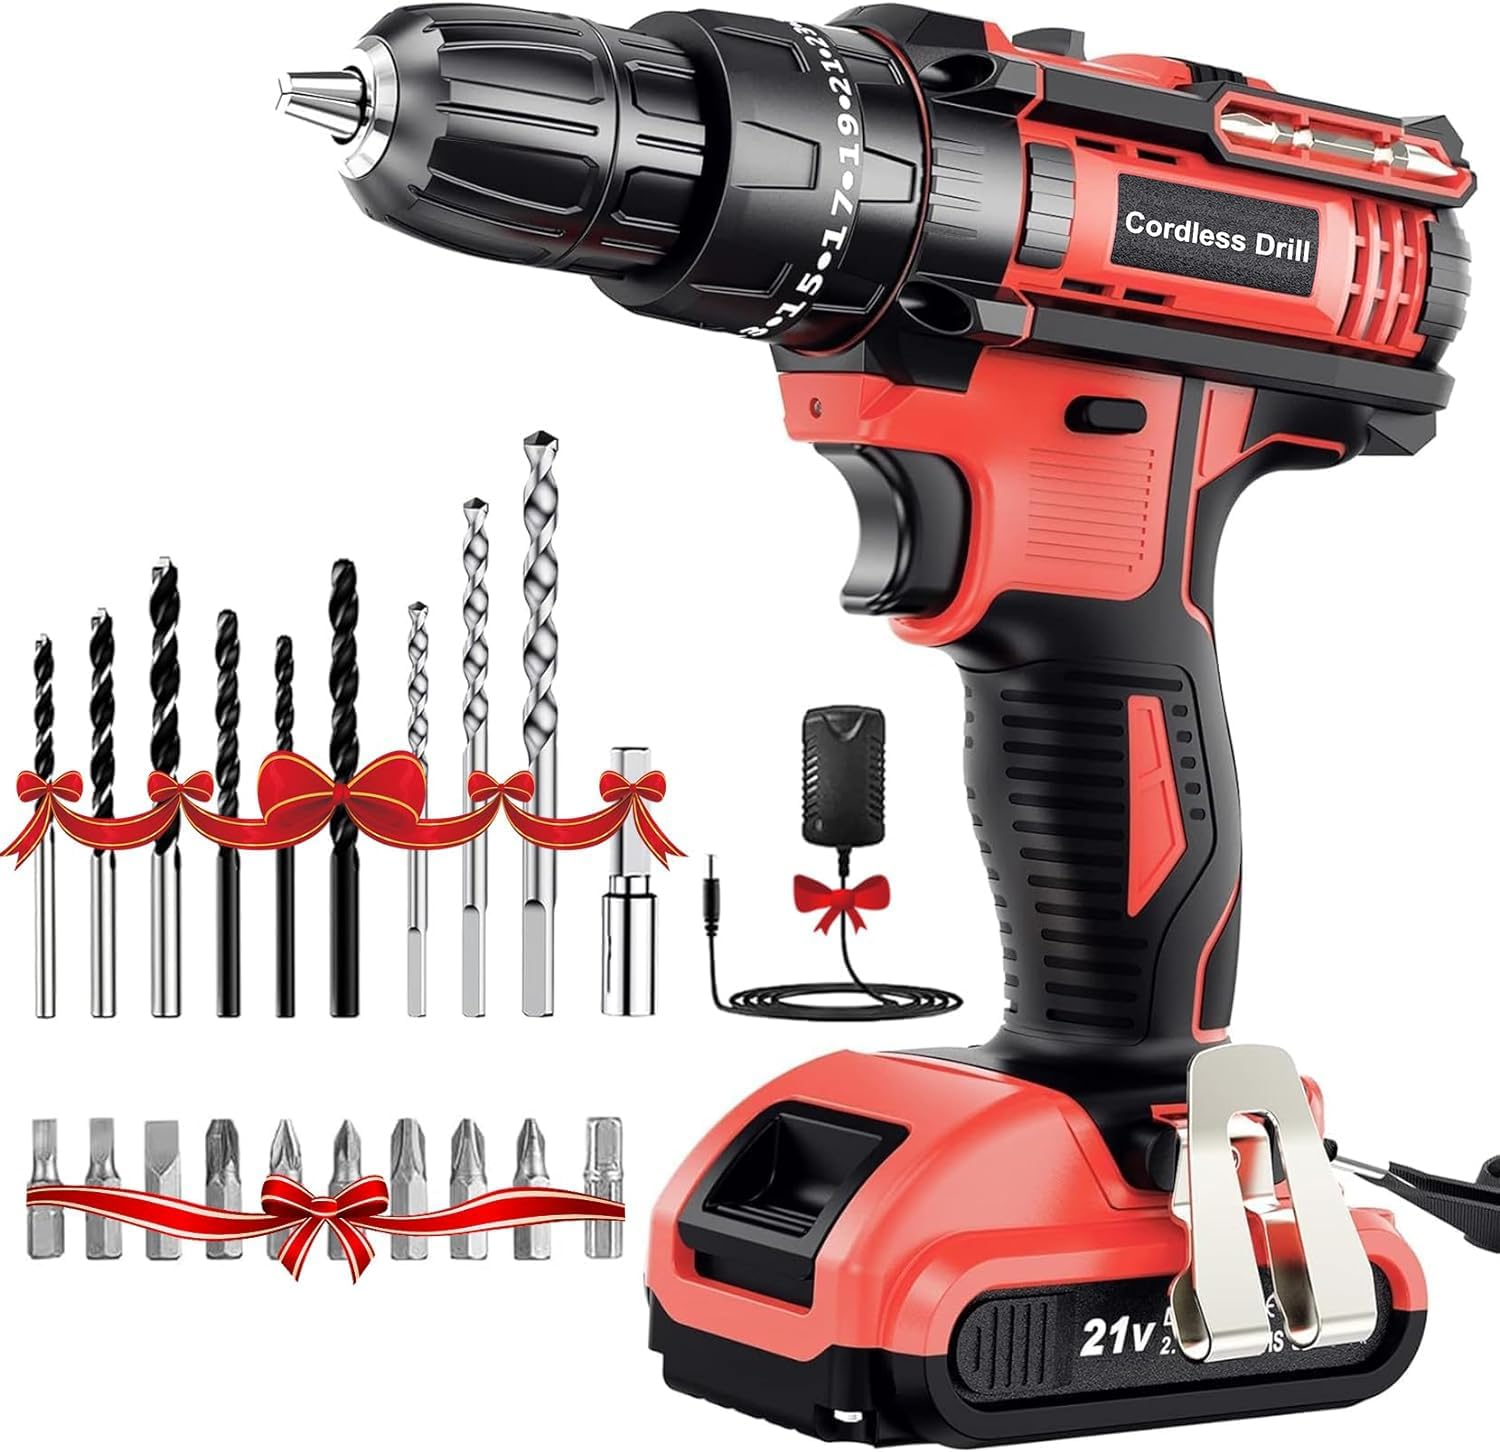 Cordless Drill with 1 battery.jpg